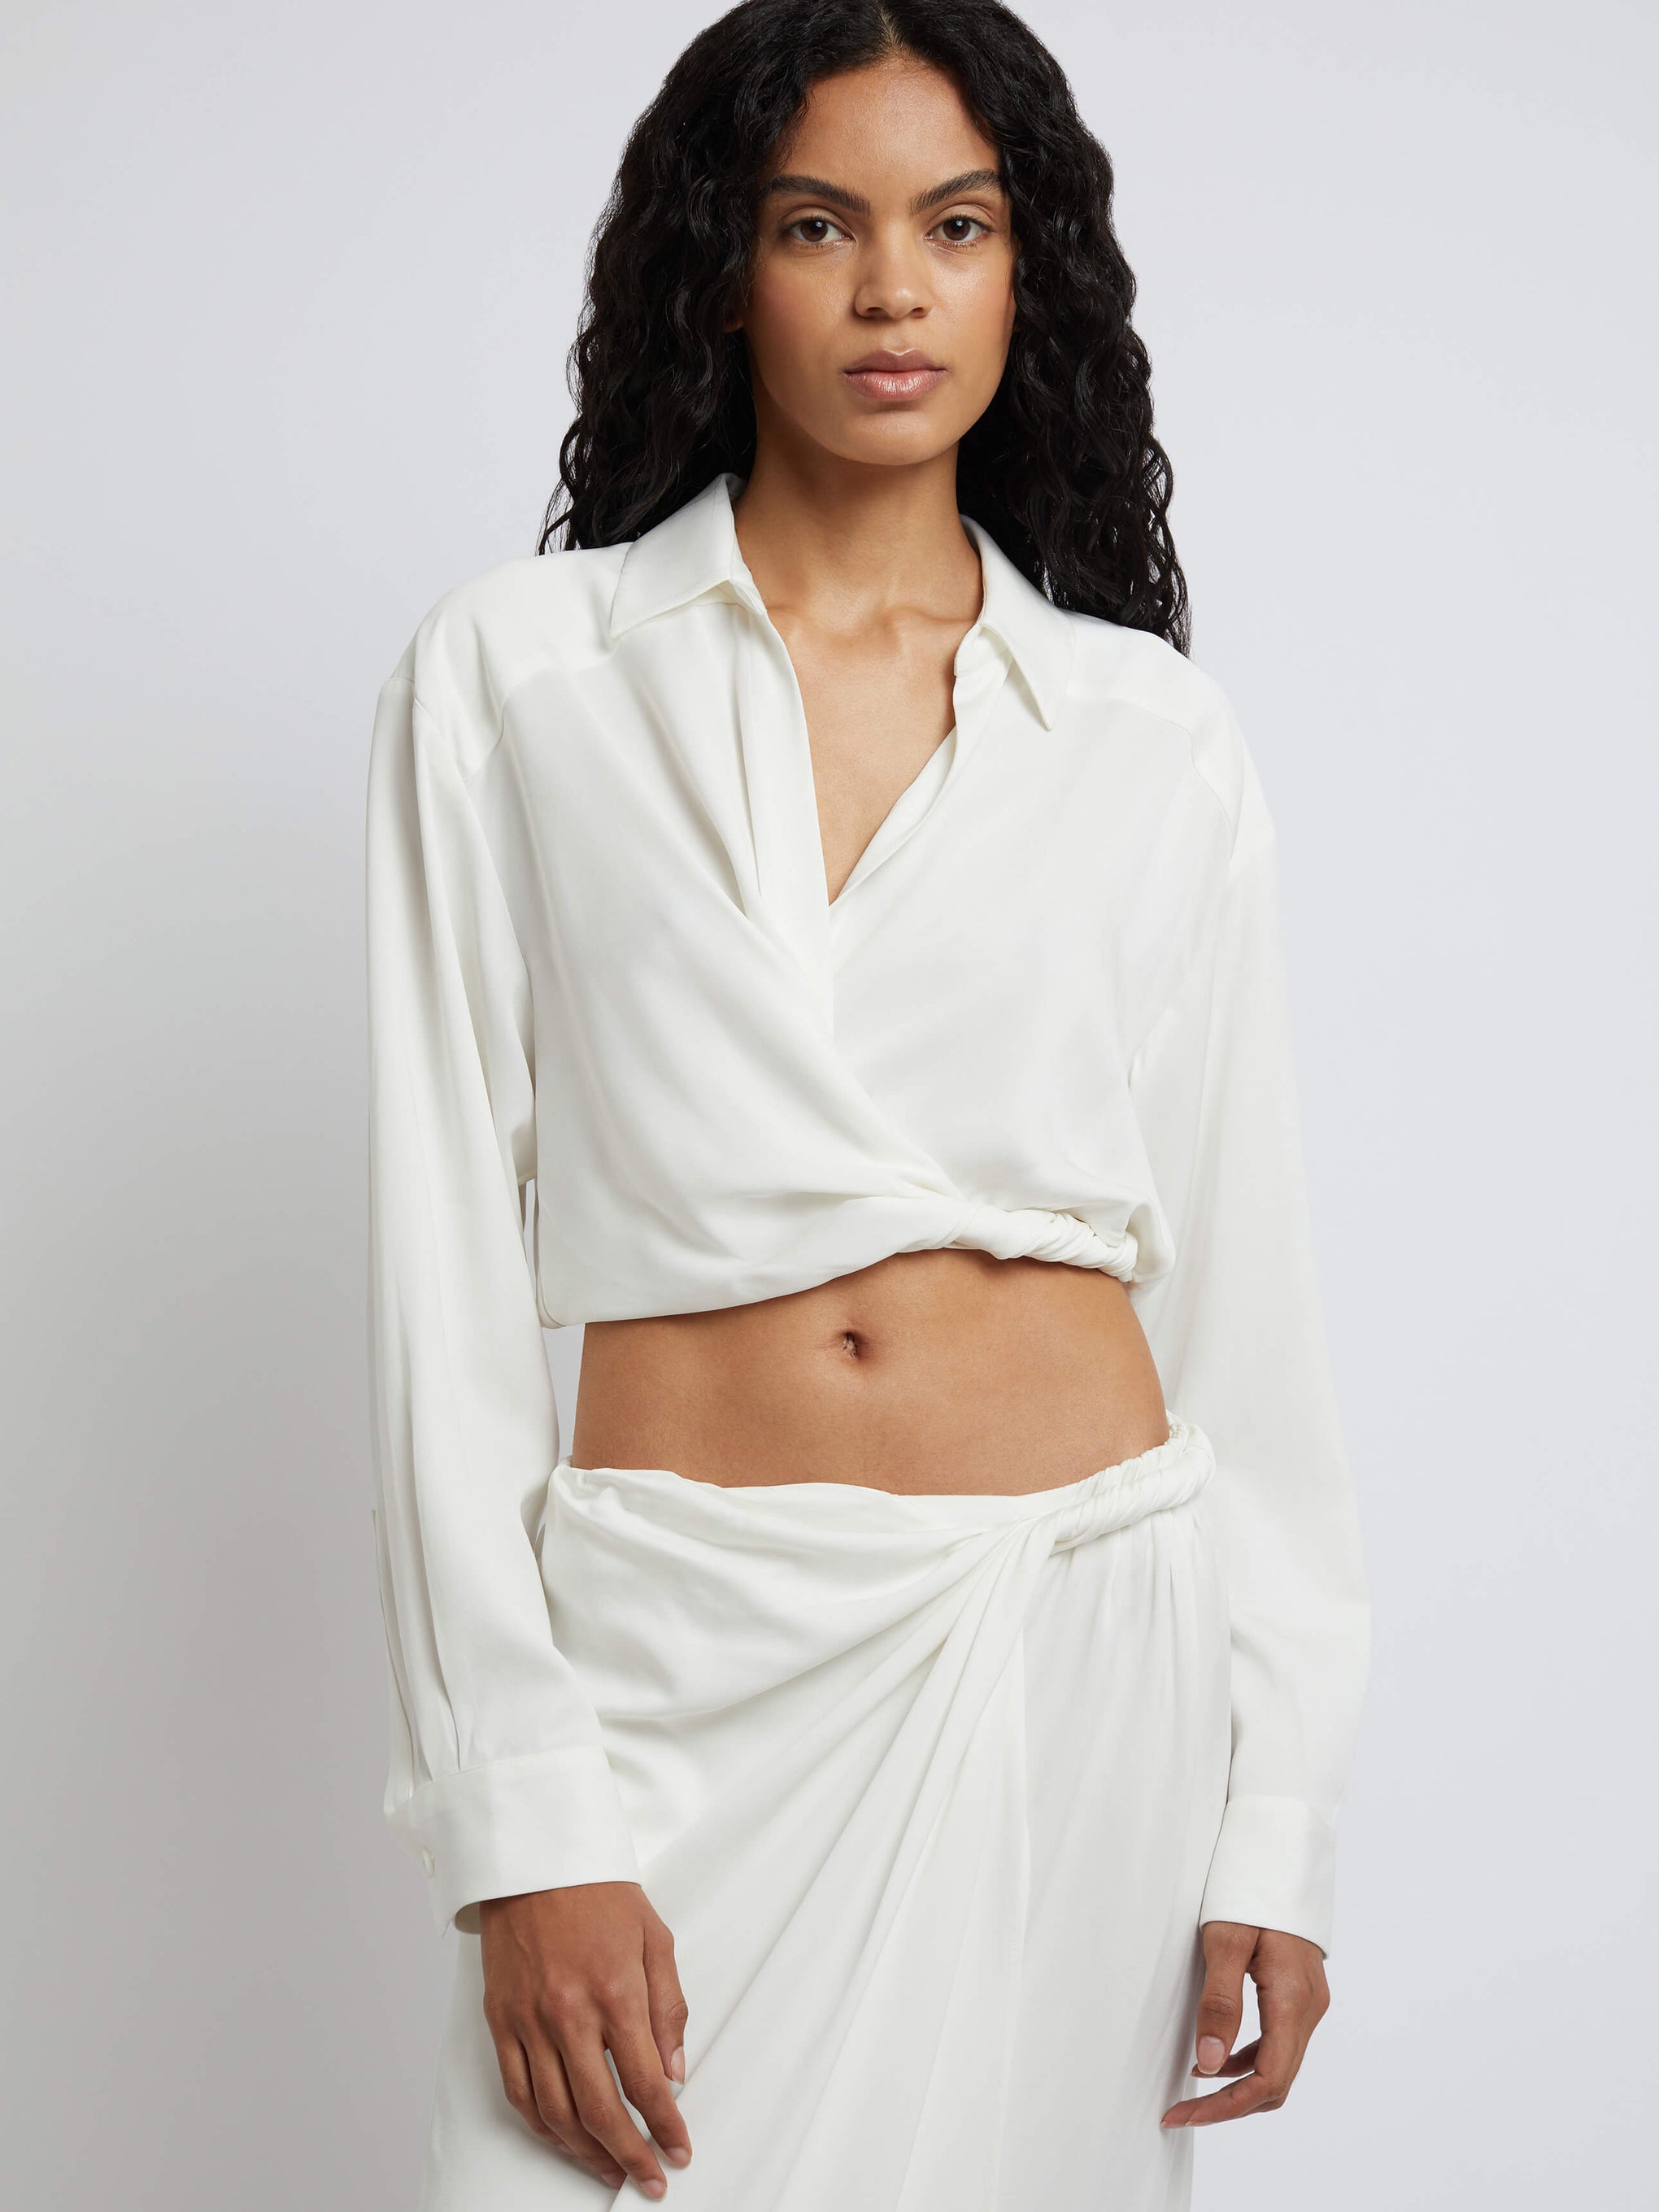 Christopher Esber Wrapped Crop Shirt in White available at TNT The New Trend Australia.